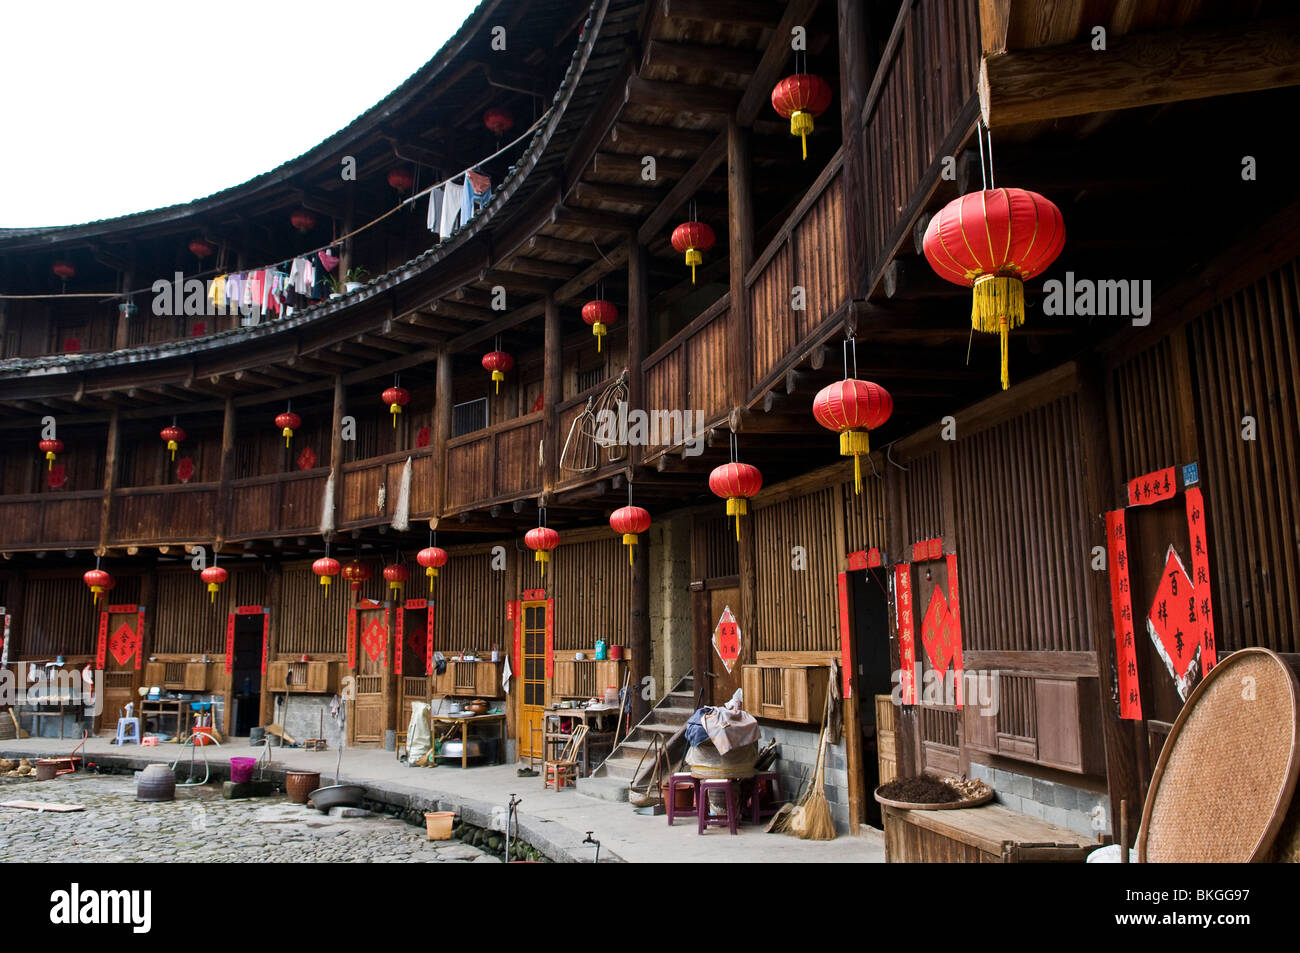 Inside a beautiful Tulou building in the Yongding region of Fujian province. Stock Photo